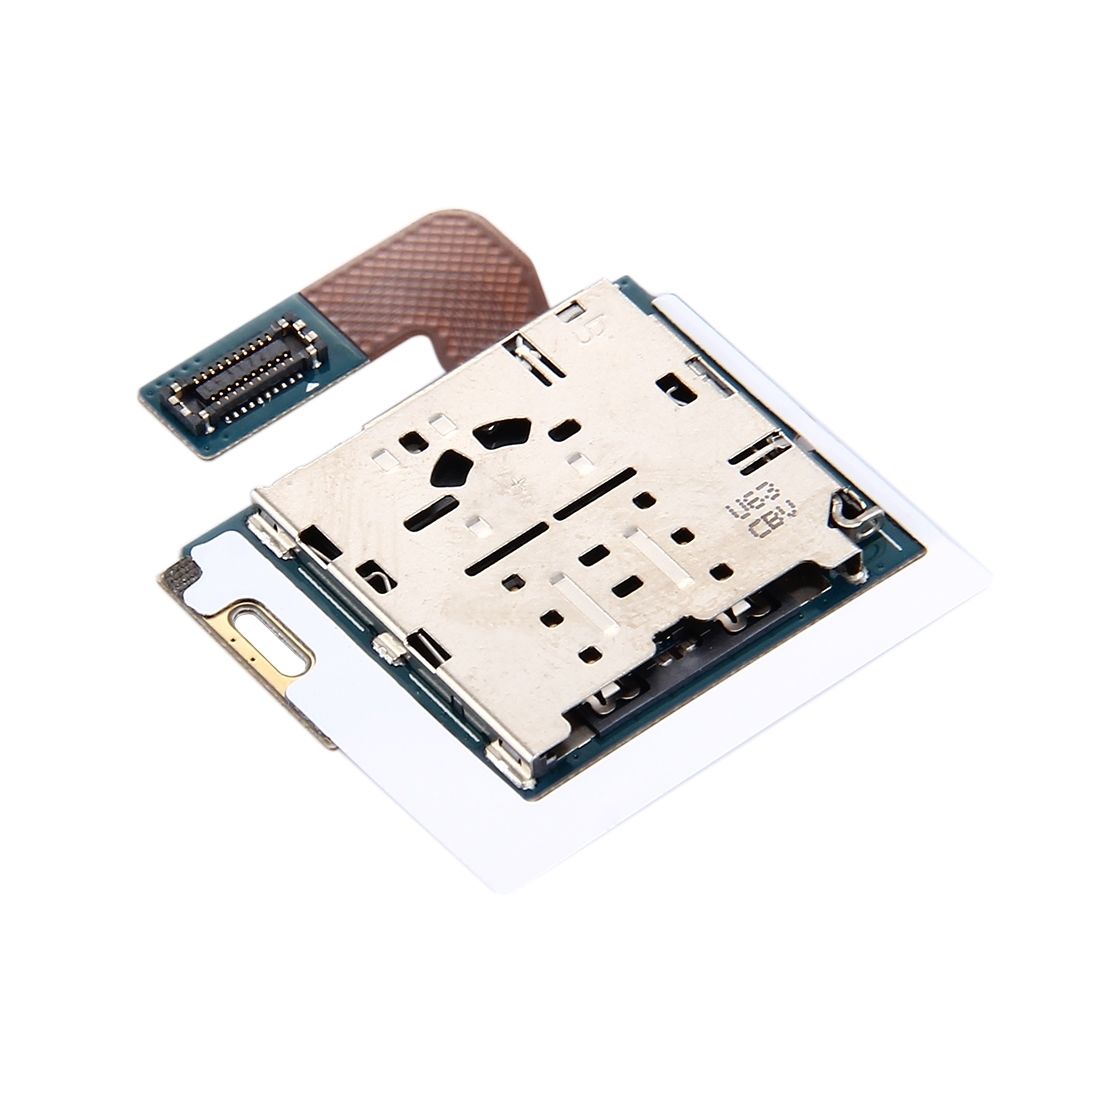 Samsung Galaxy Tab S2 9.7 - Micro SD Card Reader Flex Cable for [product_price] - First Help Tech